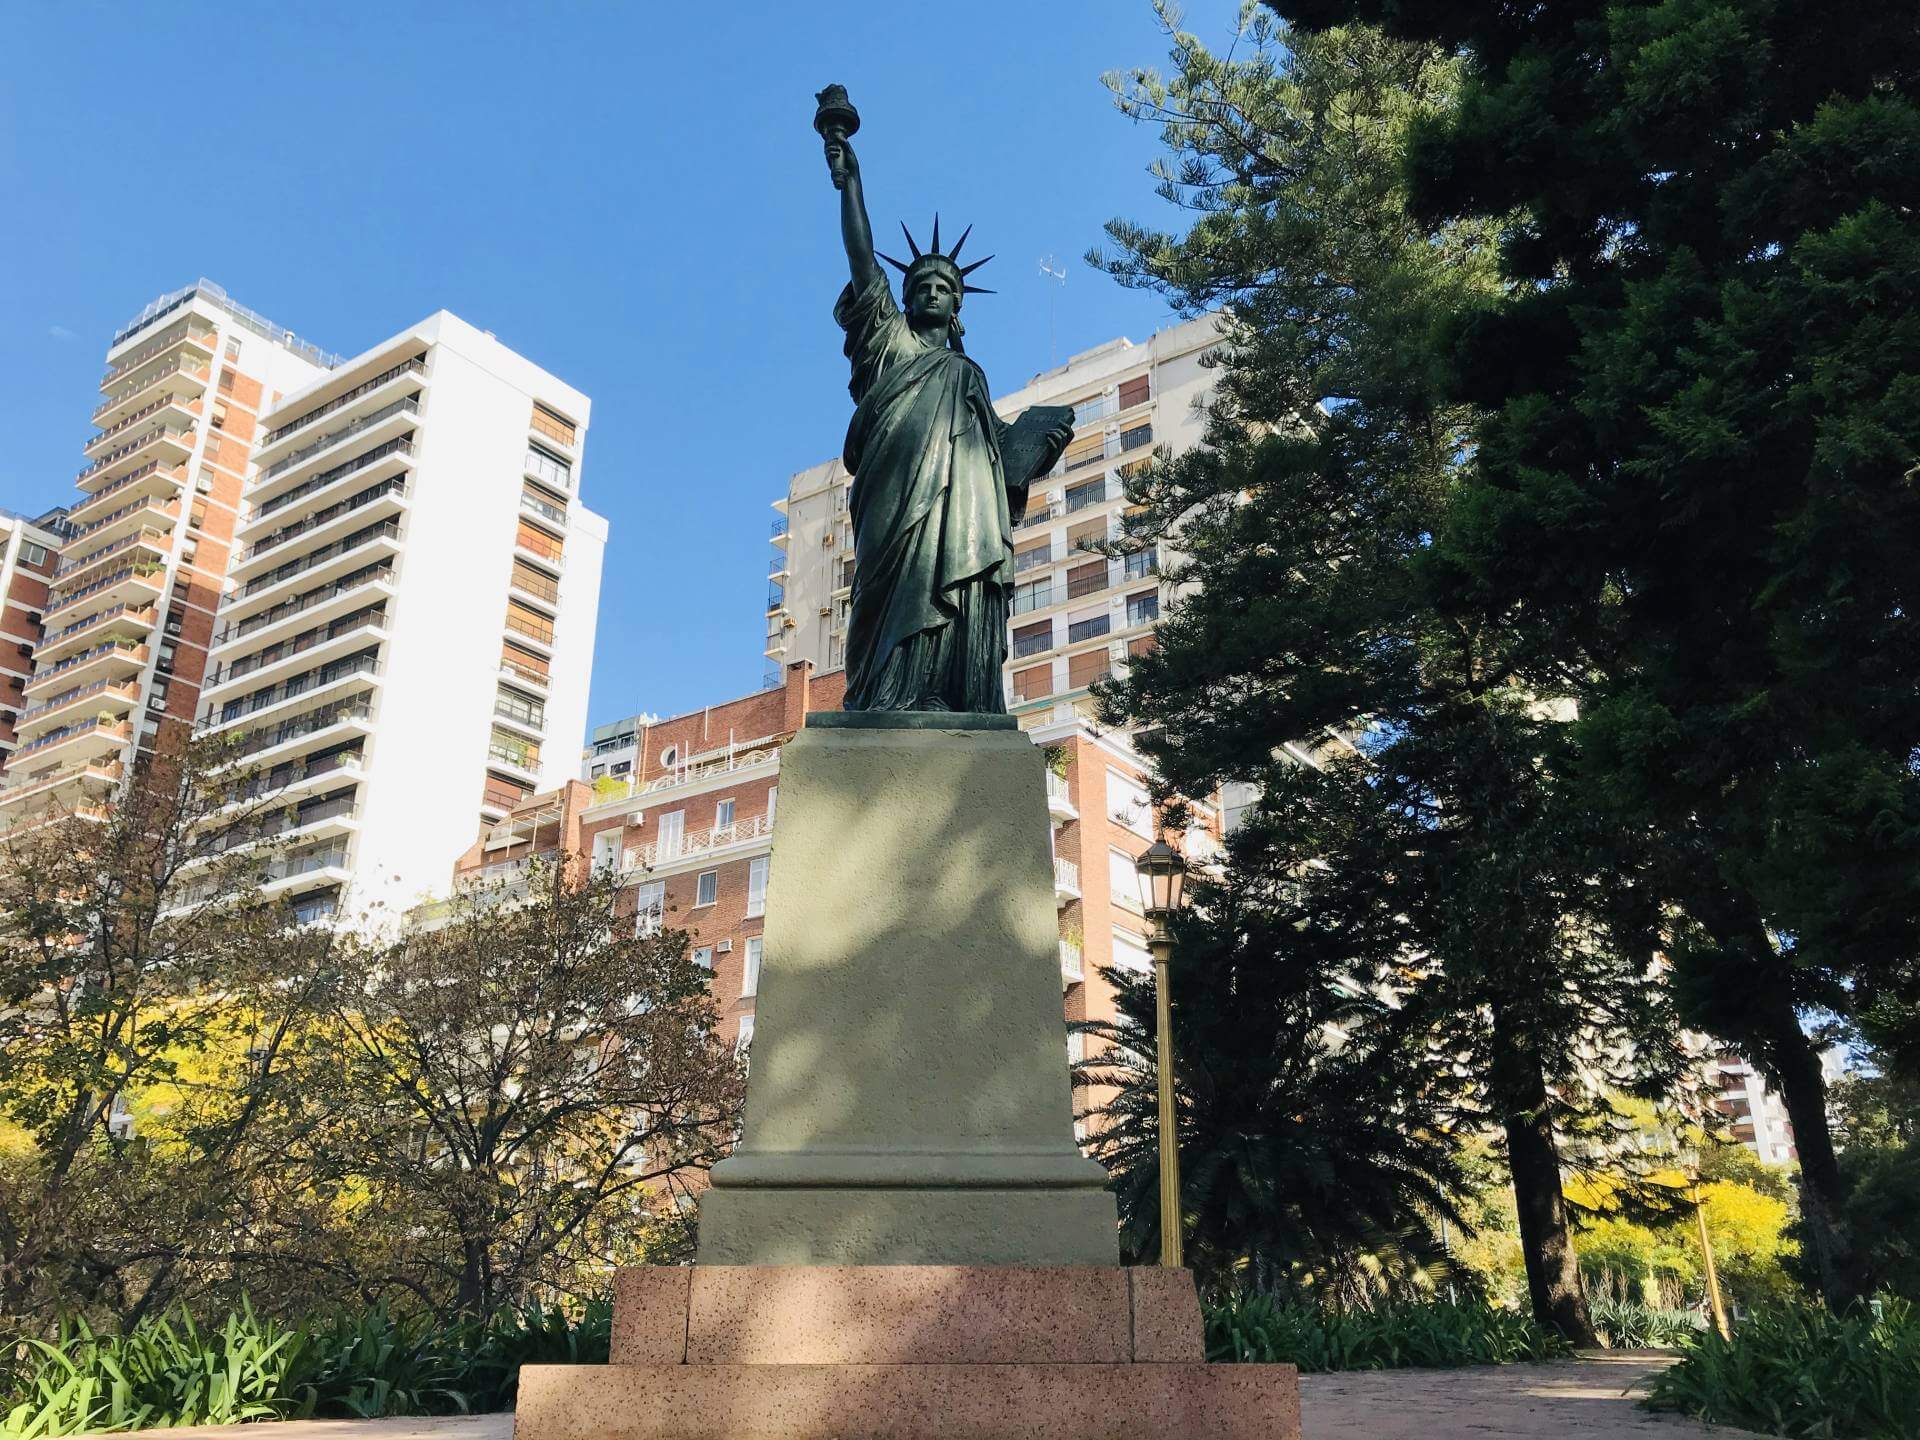 Statue of Liberty Buenos Aires